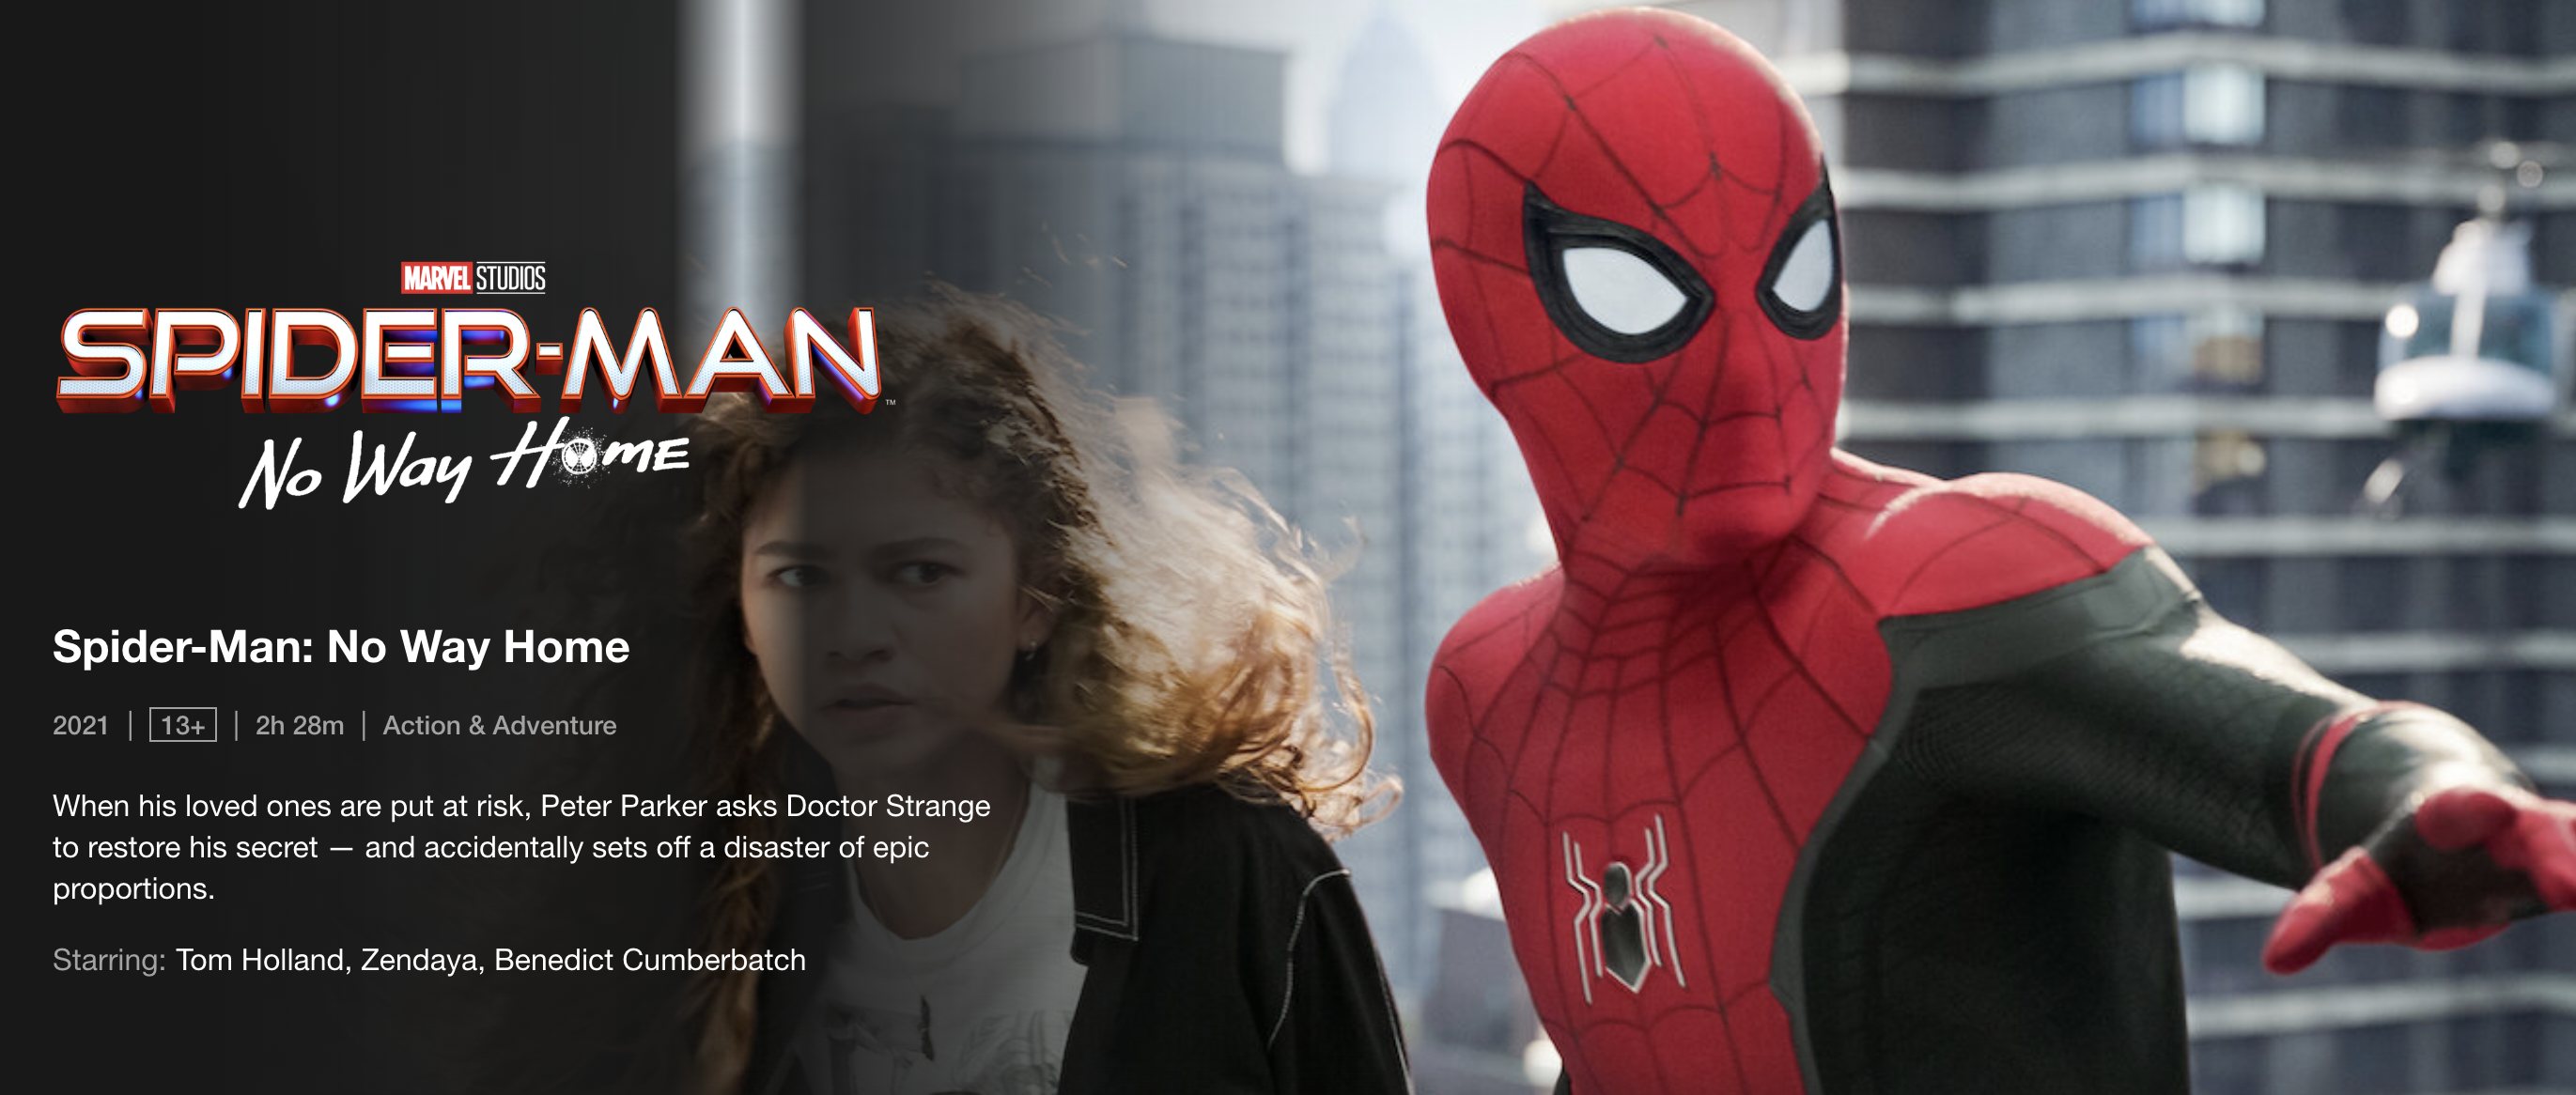 Spider-Man: No Way Home Is Now Available To Stream On Netflix In 4K